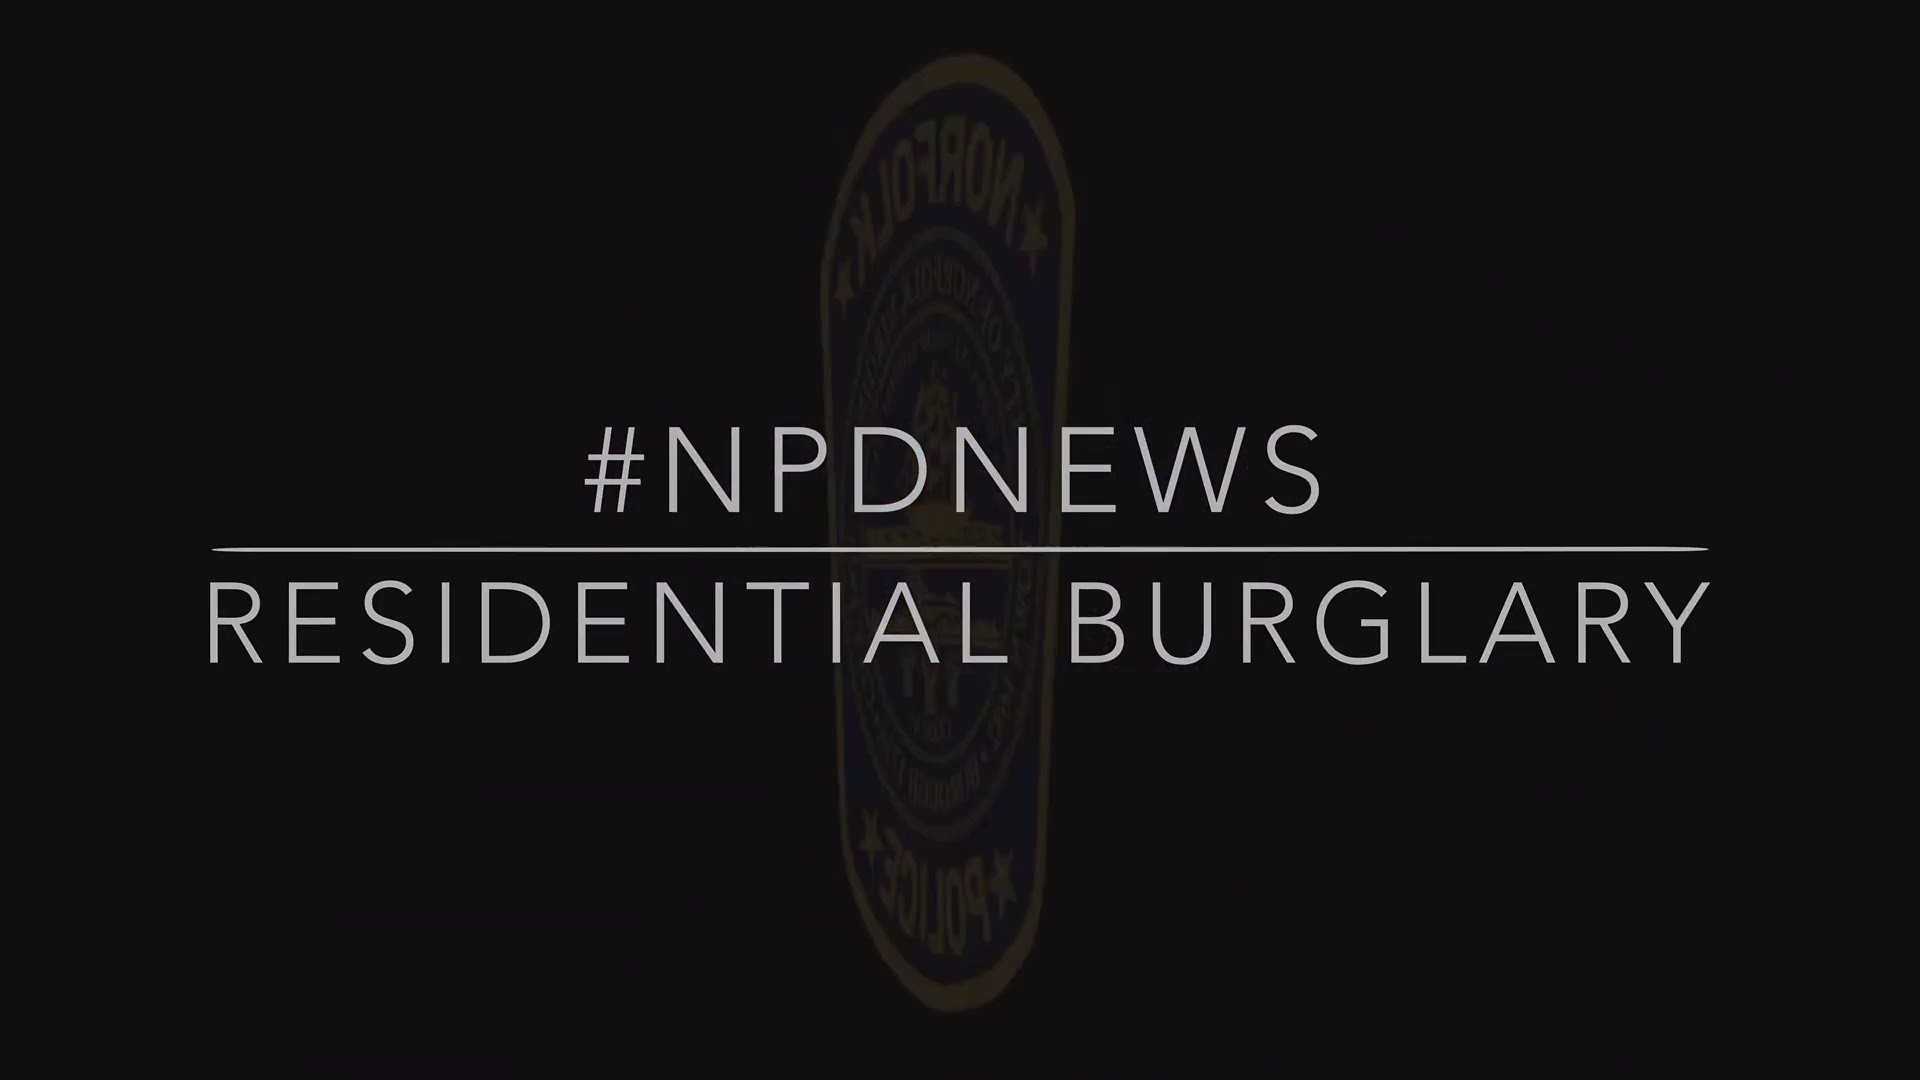 Two burglars on October 11, 2019, were caught on camera entering a home located in the 400 block of Glendale Avenue. Police said they shot and killed a dog.